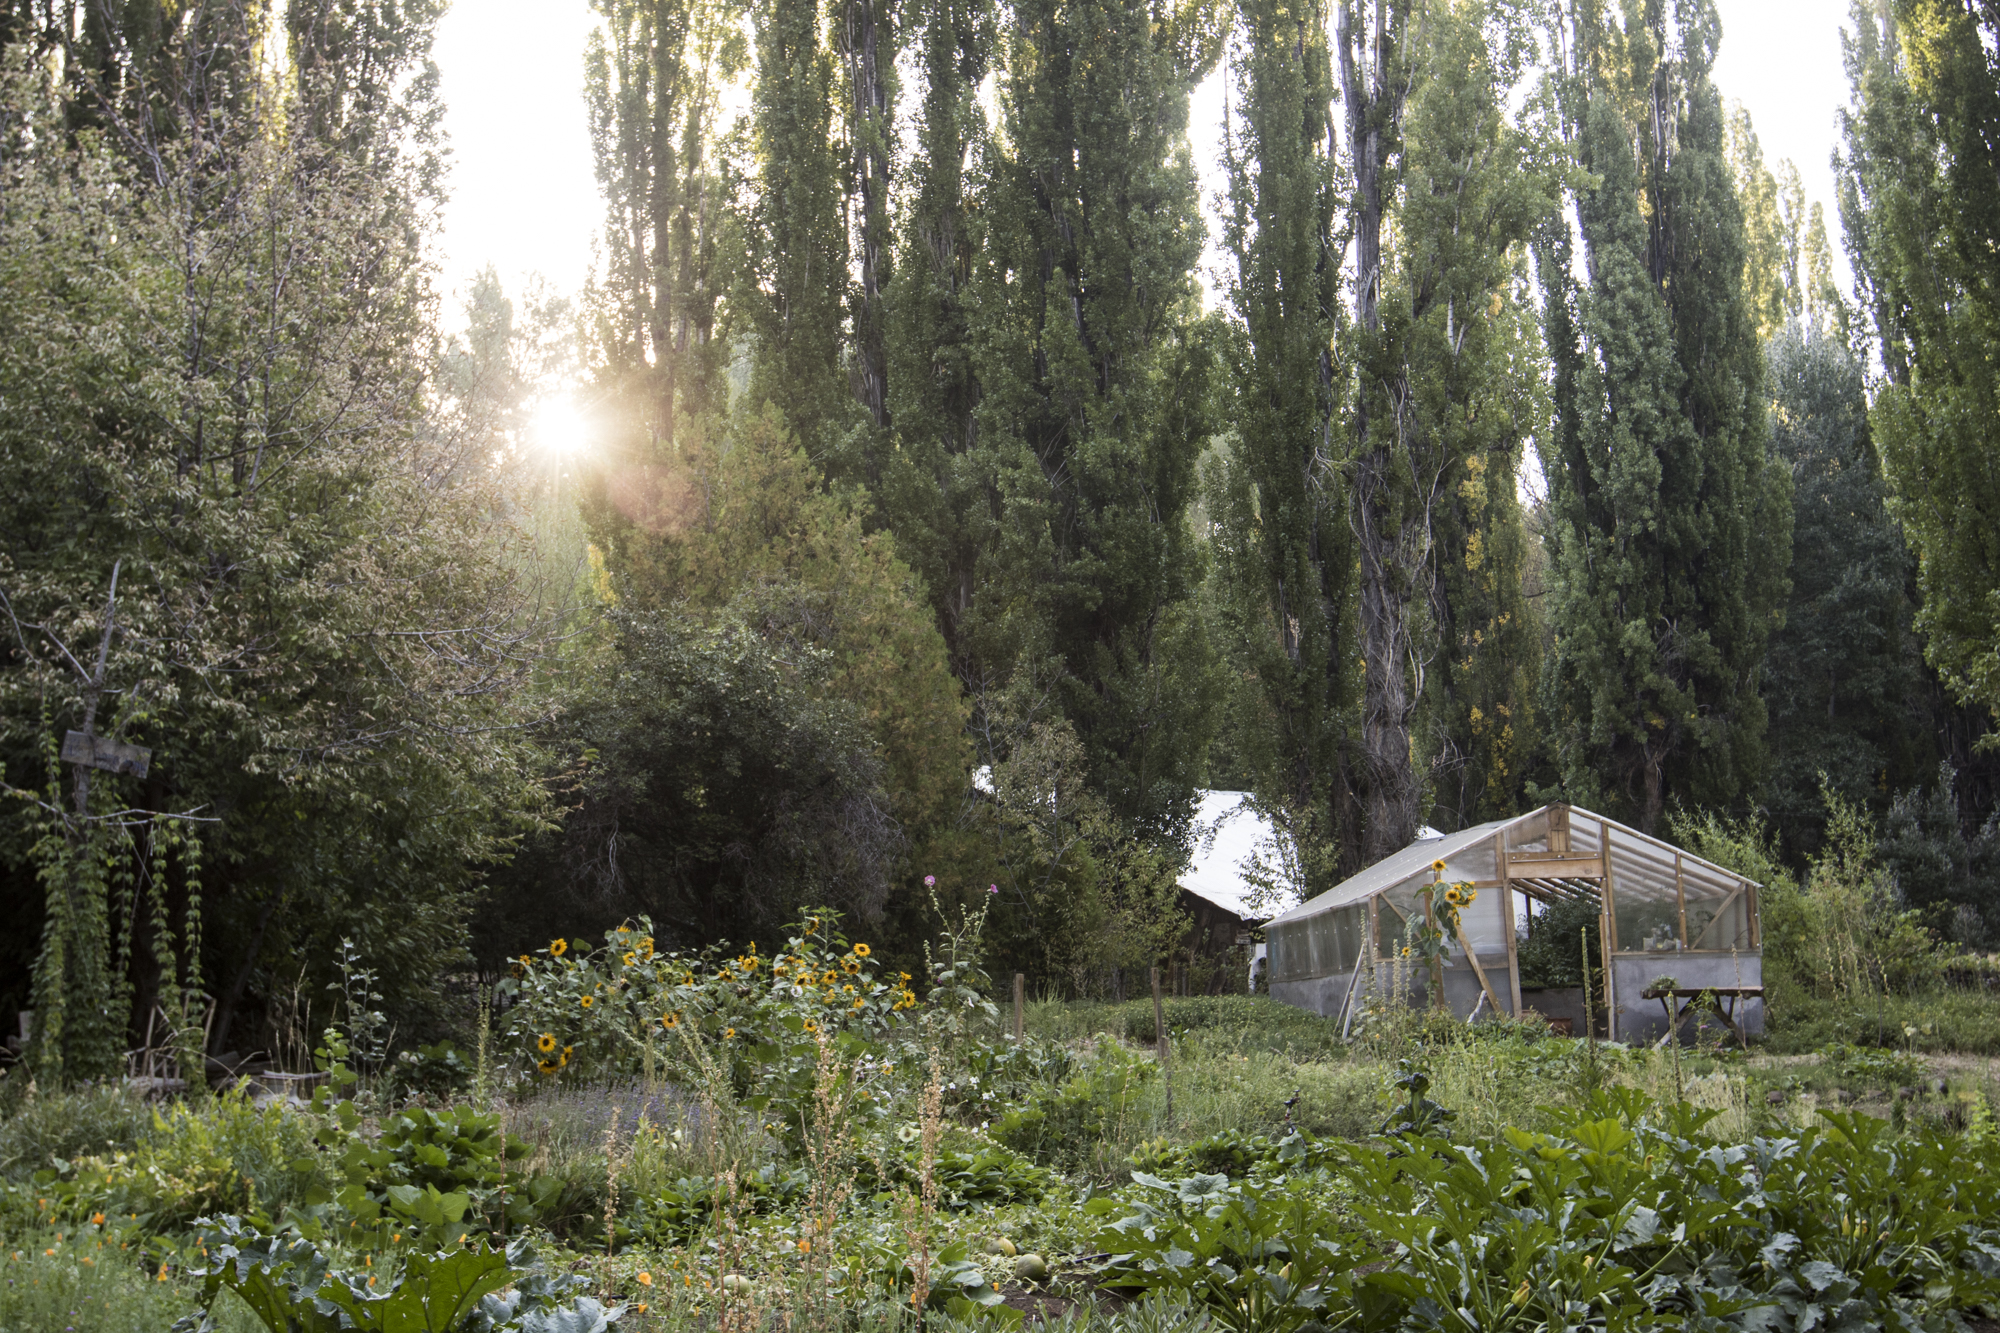 The organic garden at Estancia Ranquilco provides fresh produce to the off-grid lodge